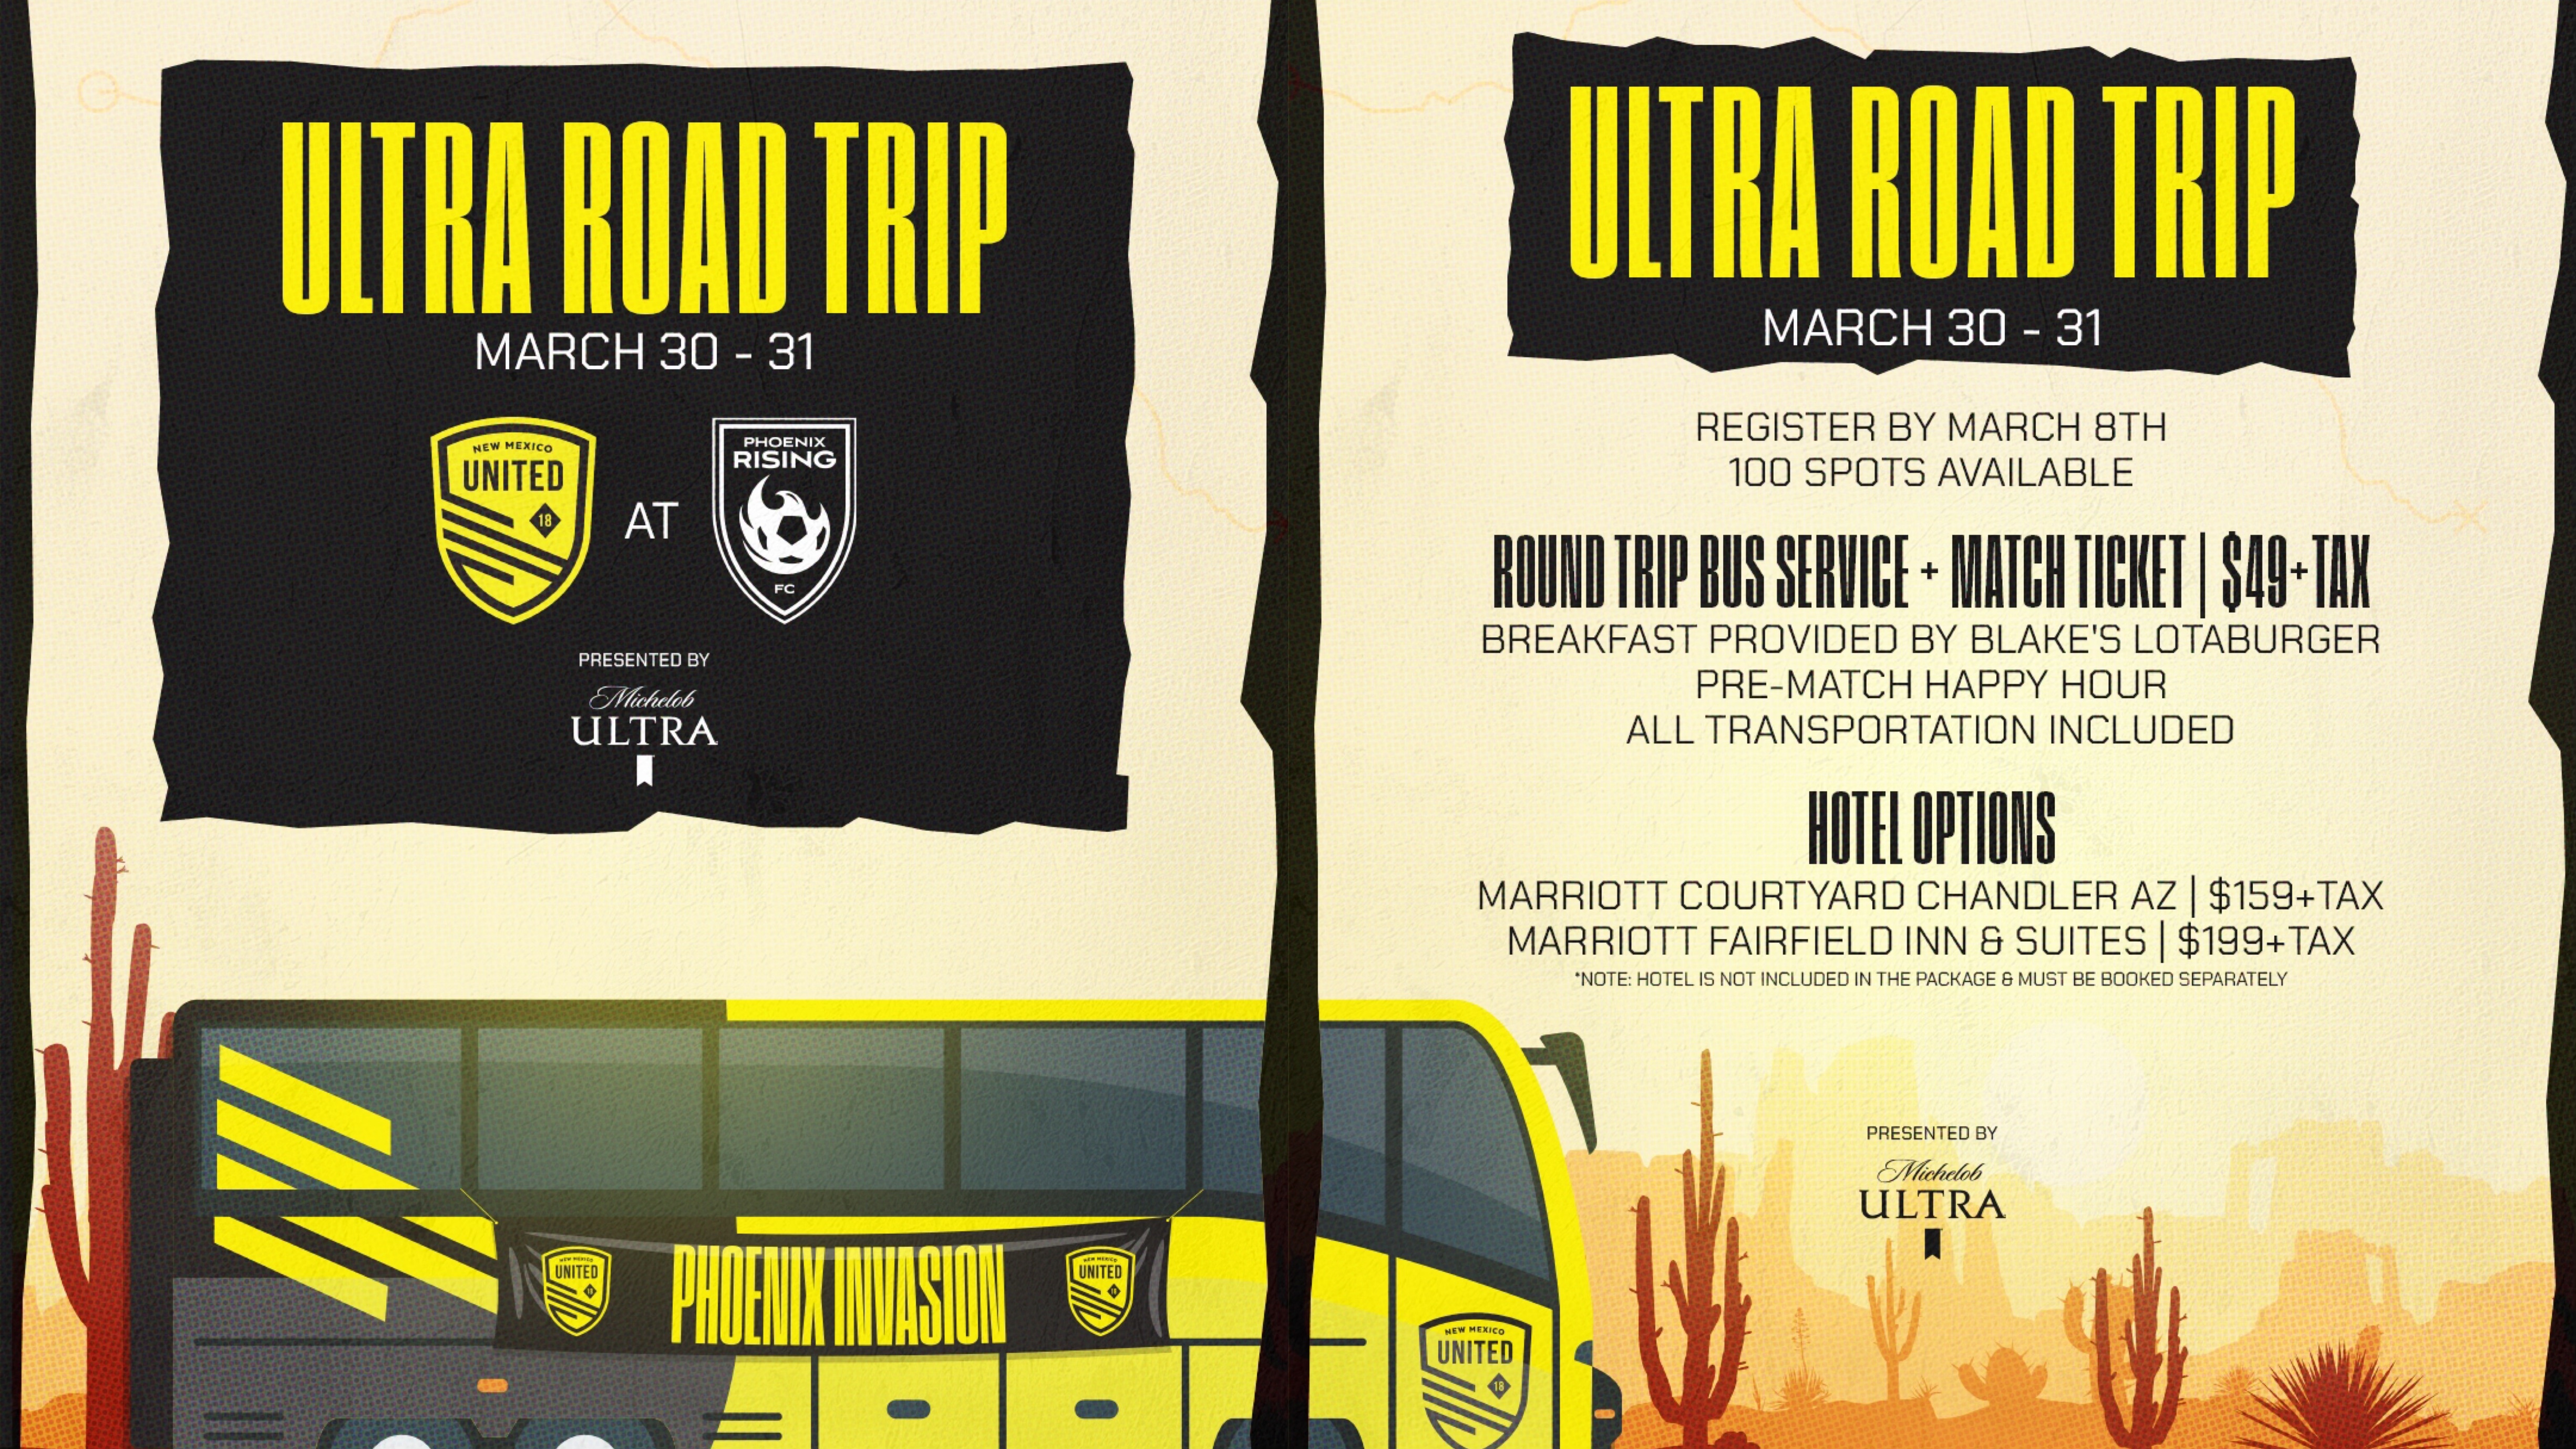 NEW MEXICO UNITED & MICHELOB ULTRA LAUNCH “ULTRA FAN ROAD TRIP” featured image